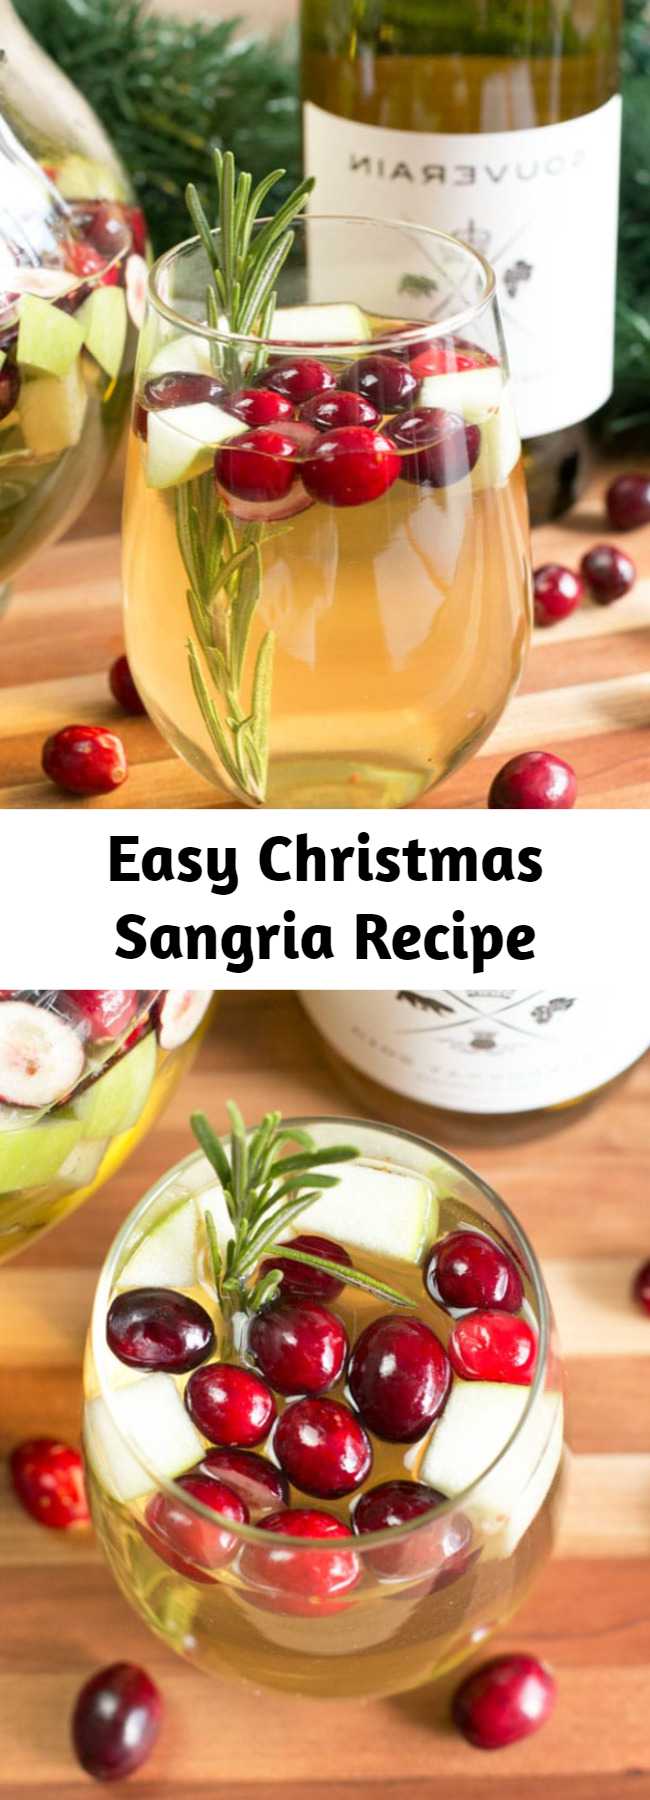 Easy Christmas Sangria Recipe - Rosemary, cranberries, and apple make this sangria the perfect Christmas drink that goes with any holiday meal!